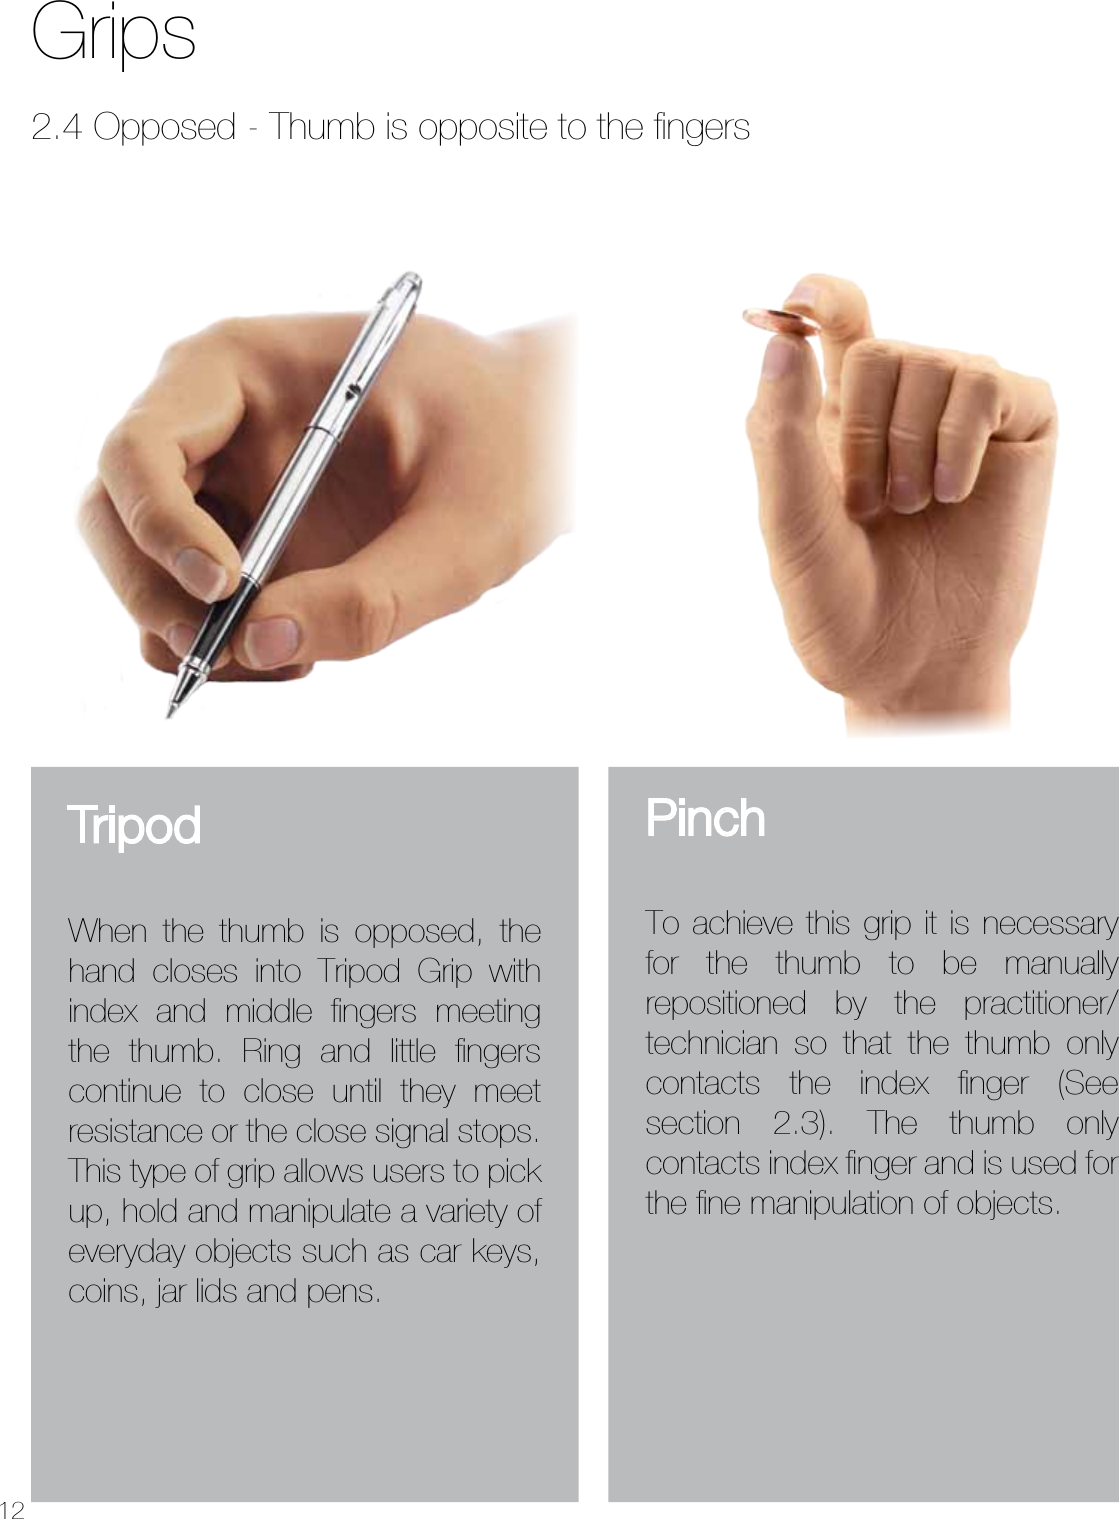 12GripsPinchTo achieve this grip it is necessary for the thumb to be manually repositioned by the practitioner/technician so that the thumb only contacts the index ﬁnger (See section 2.3). The thumb only contacts index ﬁnger and is used for the ﬁne manipulation of objects.2.4 Opposed - Thumb is opposite to the ﬁngersTripodWhen the thumb is opposed, the hand closes into Tripod Grip with index and middle fingers meeting the thumb. Ring and little fingers continue to close until they meet resistance or the close signal stops. This type of grip allows users to pick up, hold and manipulate a variety of everyday objects such as car keys, coins, jar lids and pens.